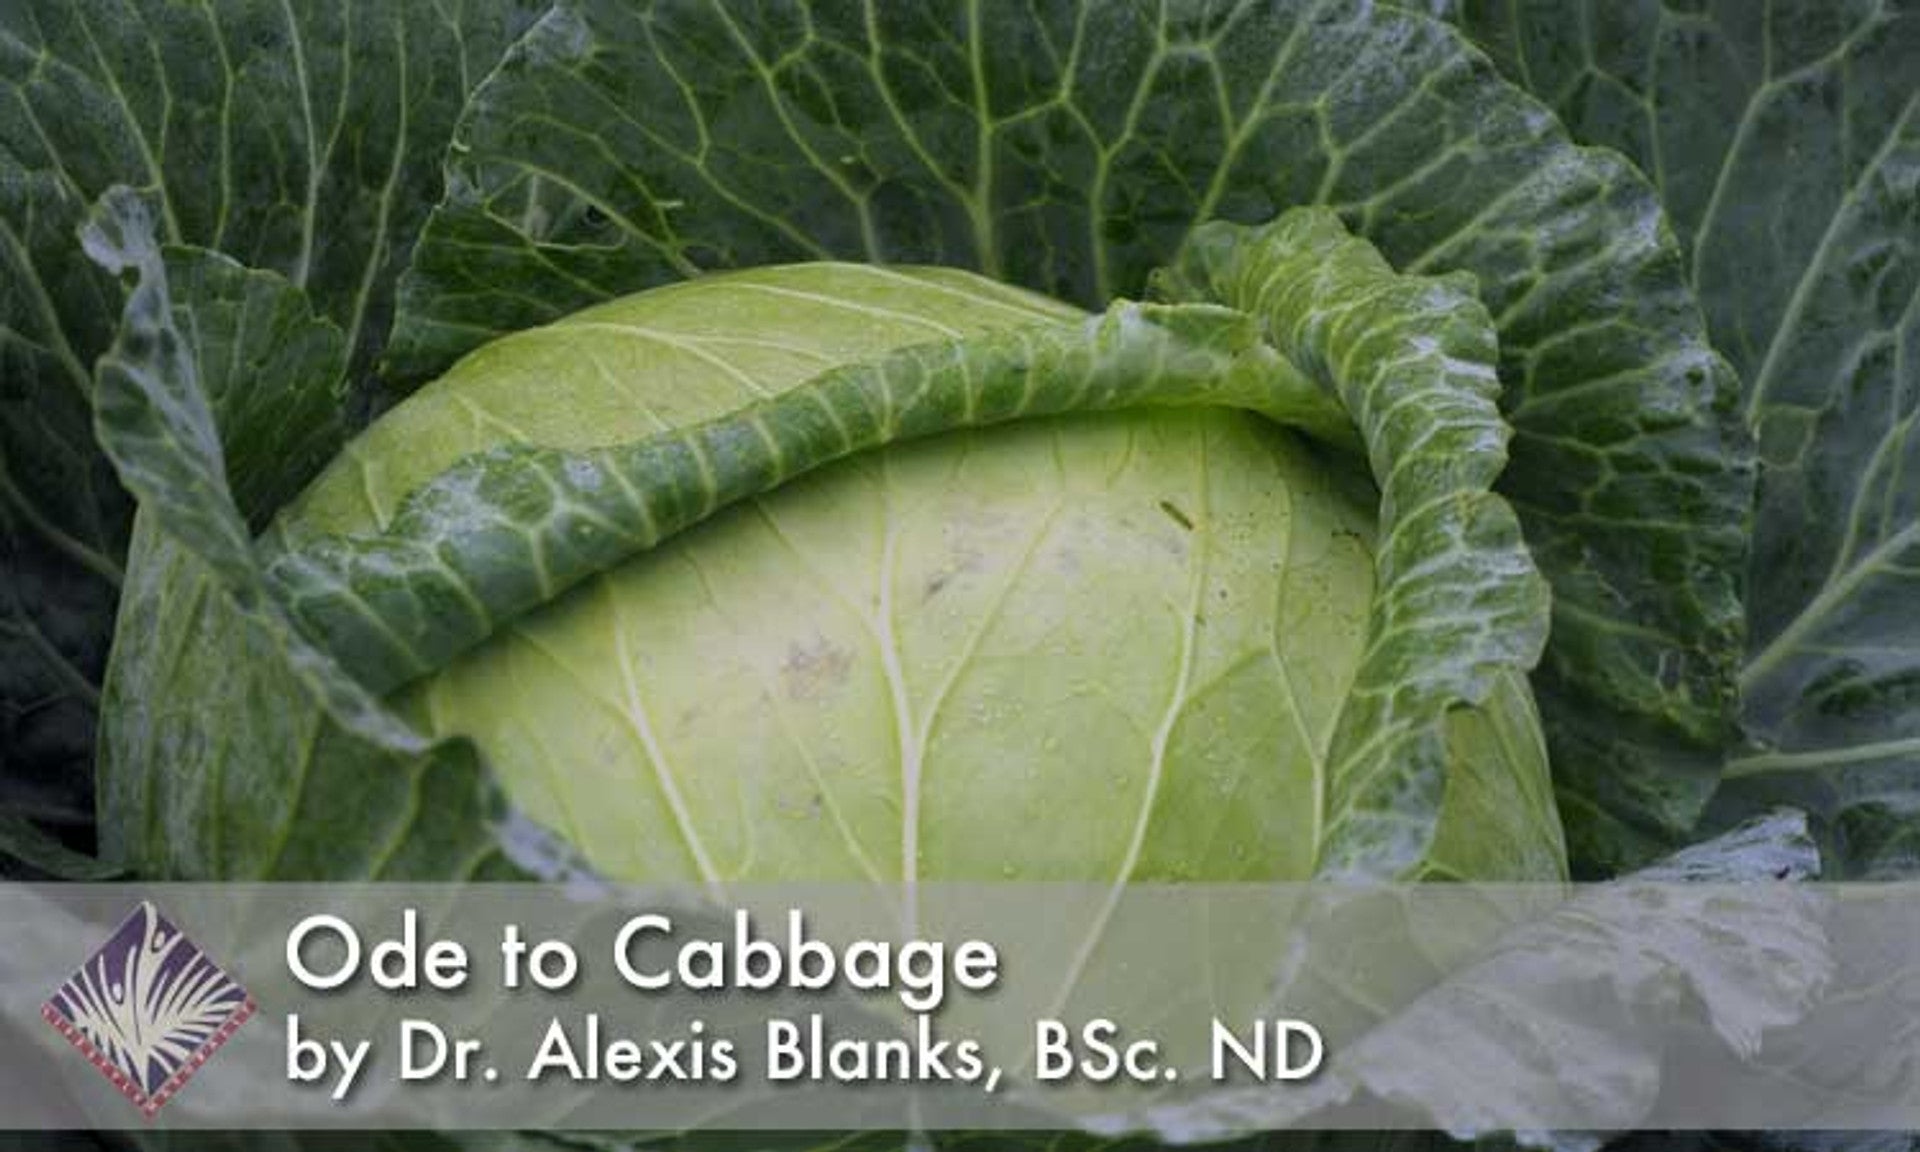 Ode to Cabbage